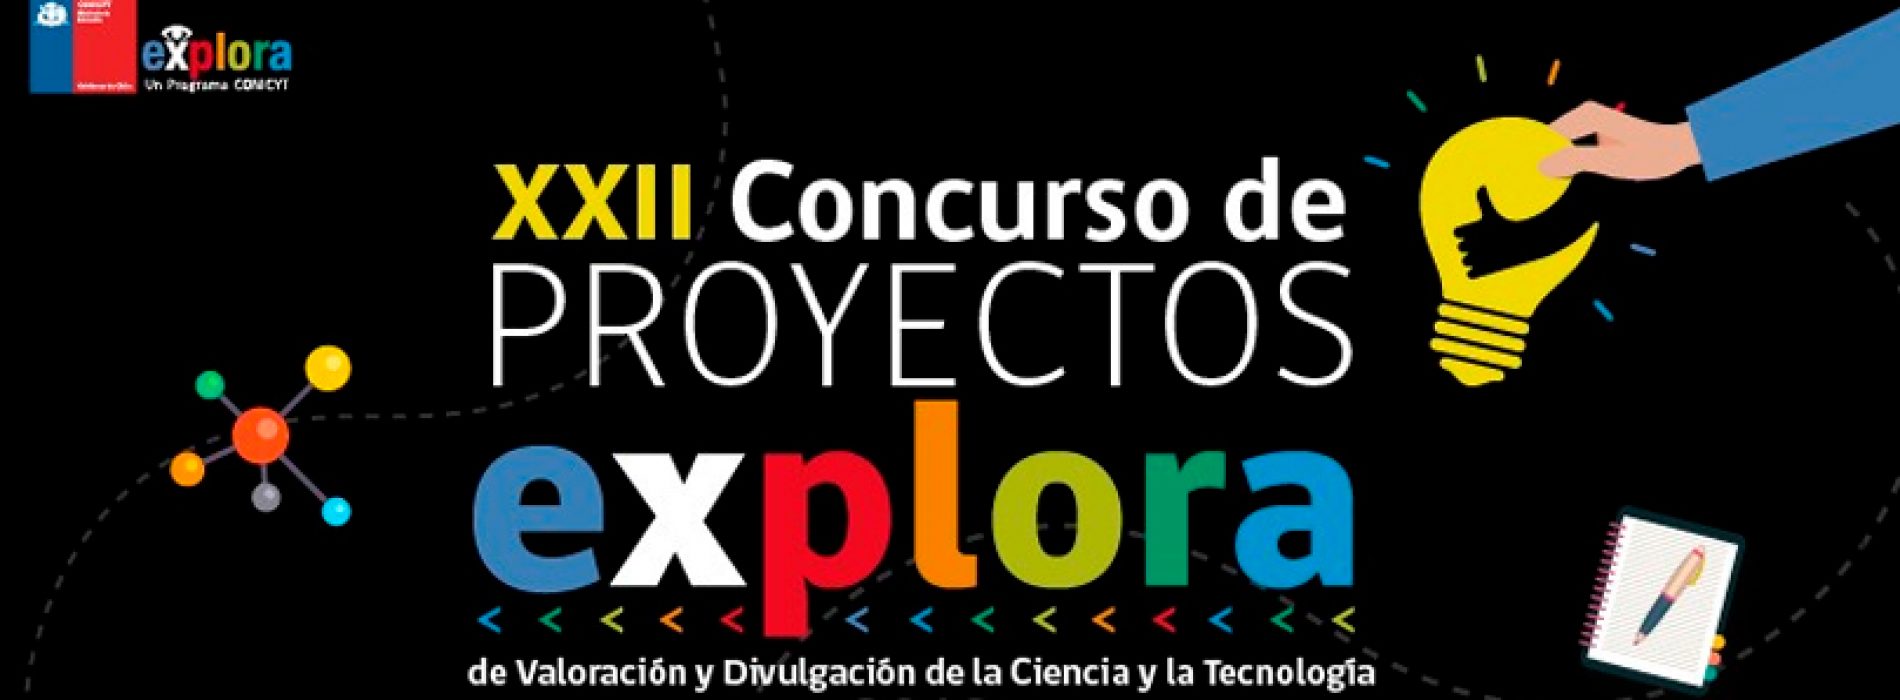 Open 22ND national contest of projects assessment and promotion of science and technology of CONICYT